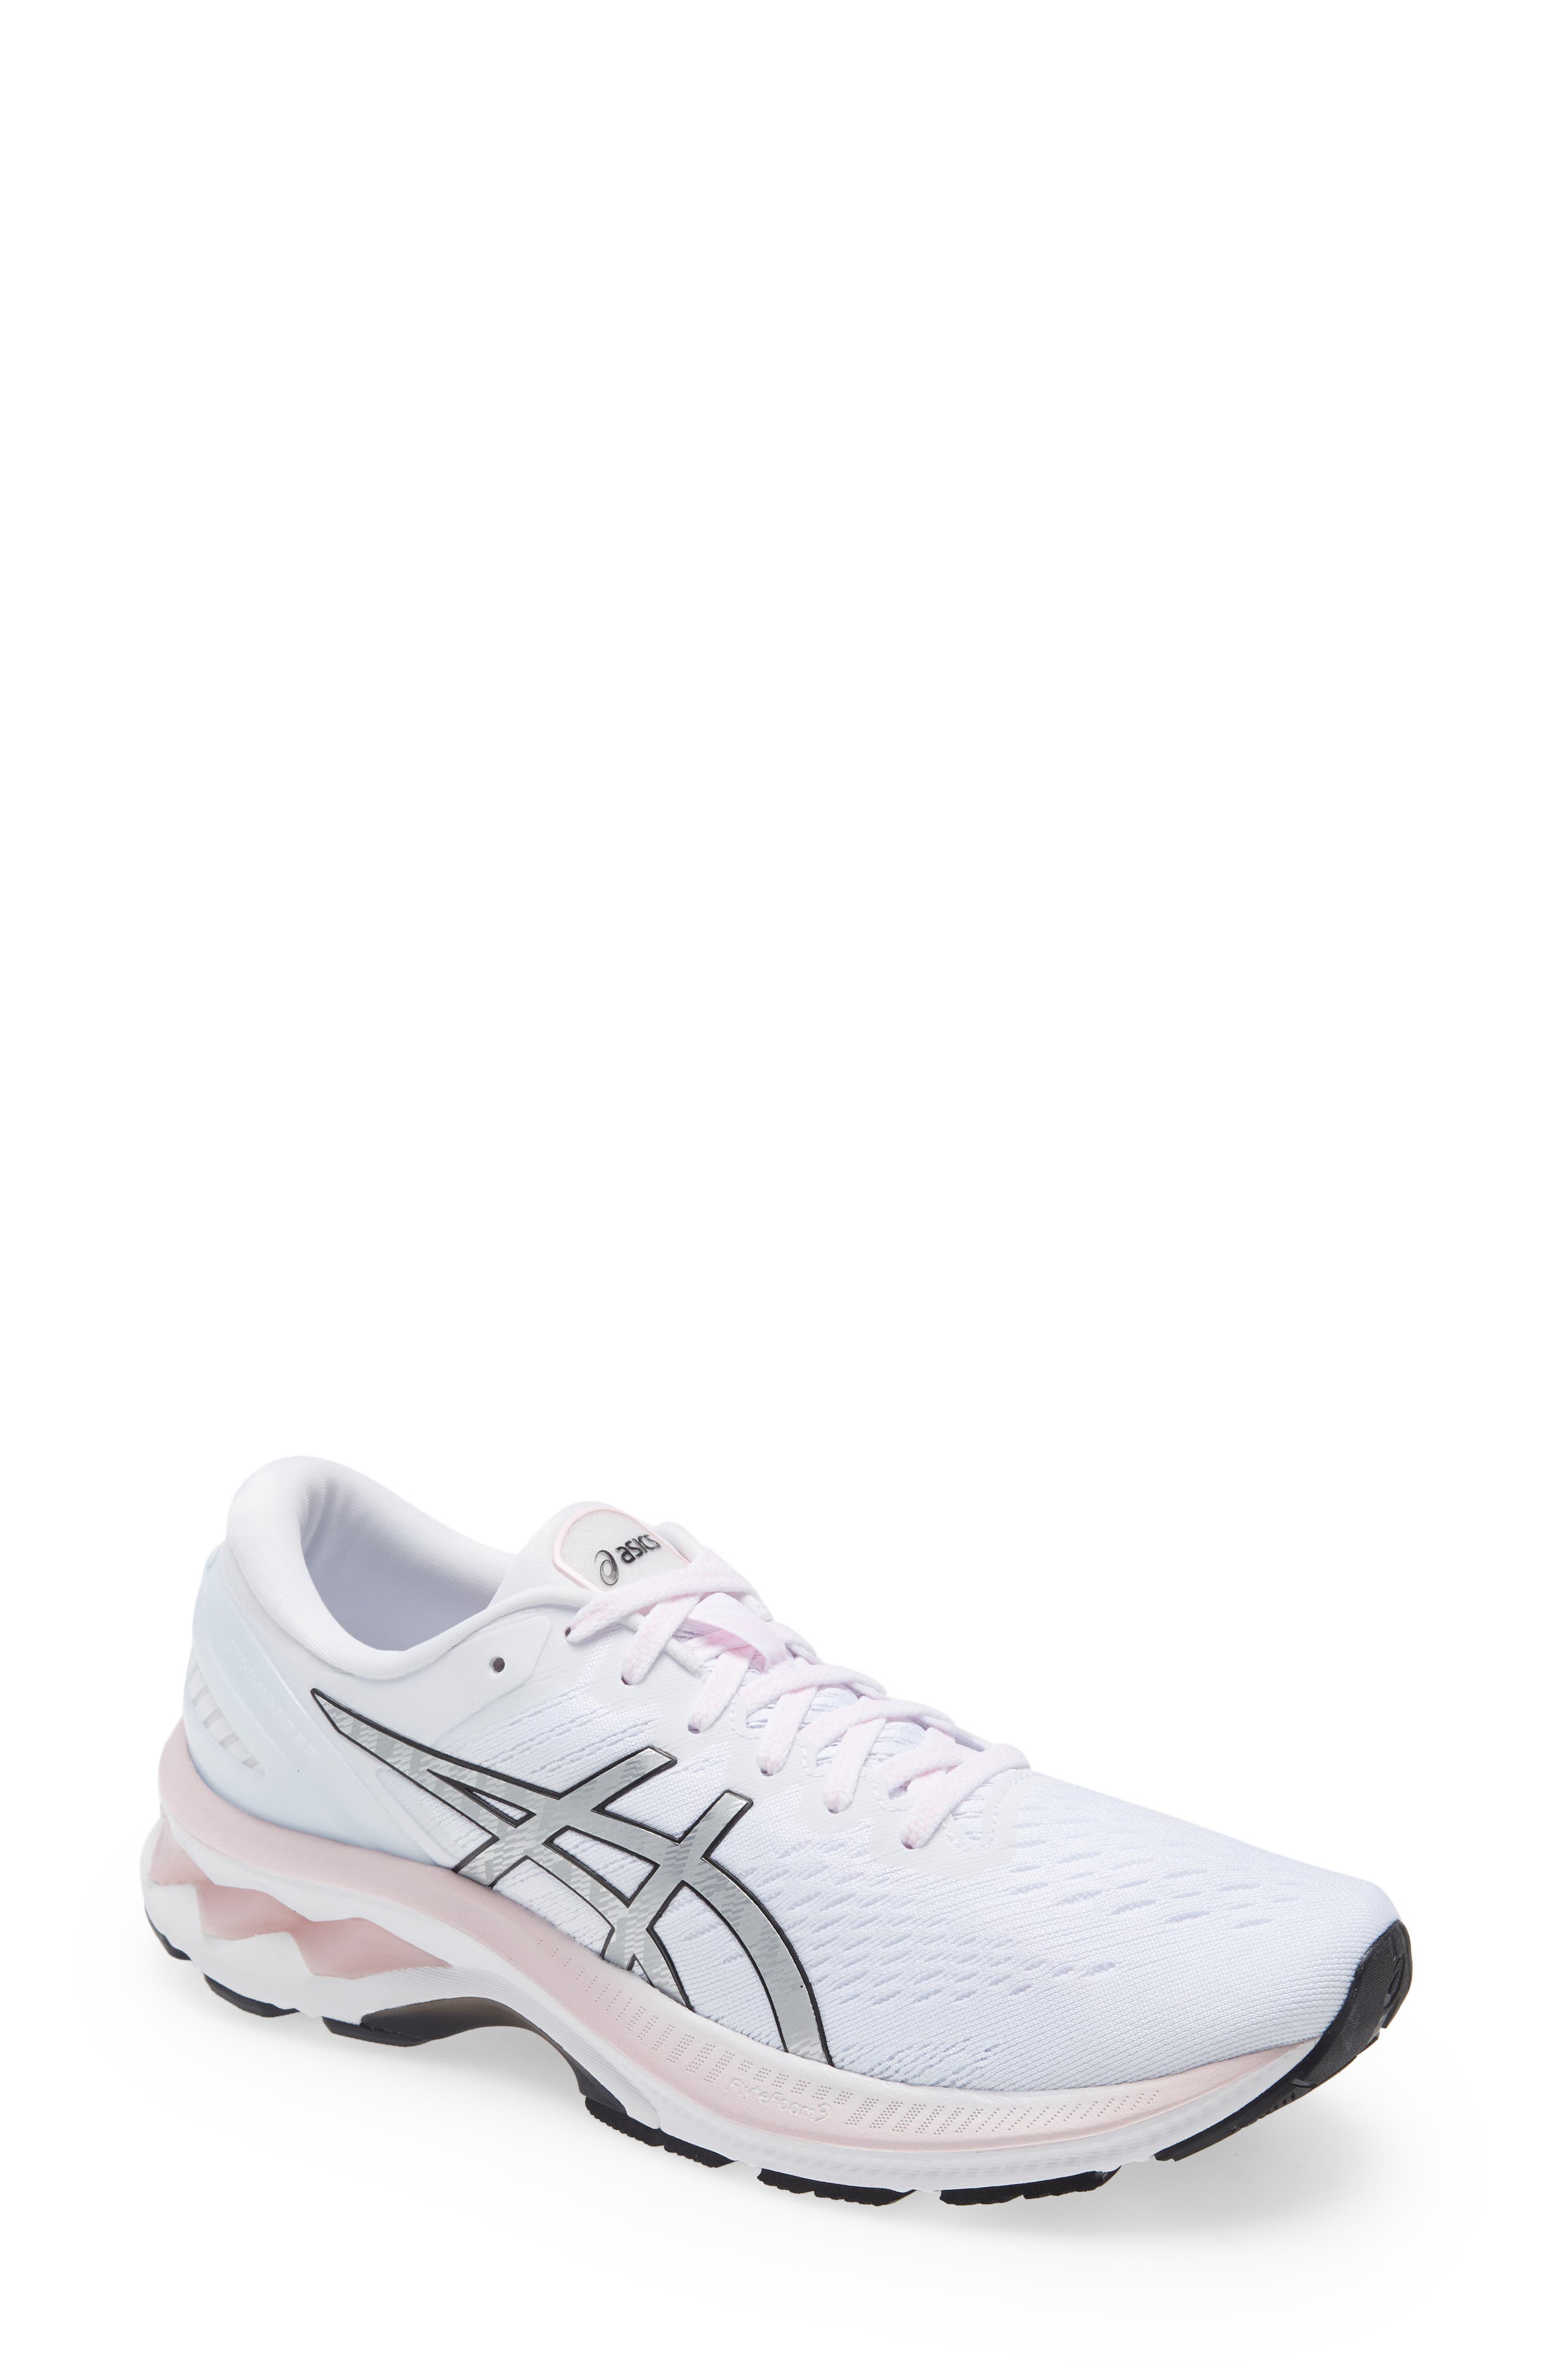 womens asic shoes